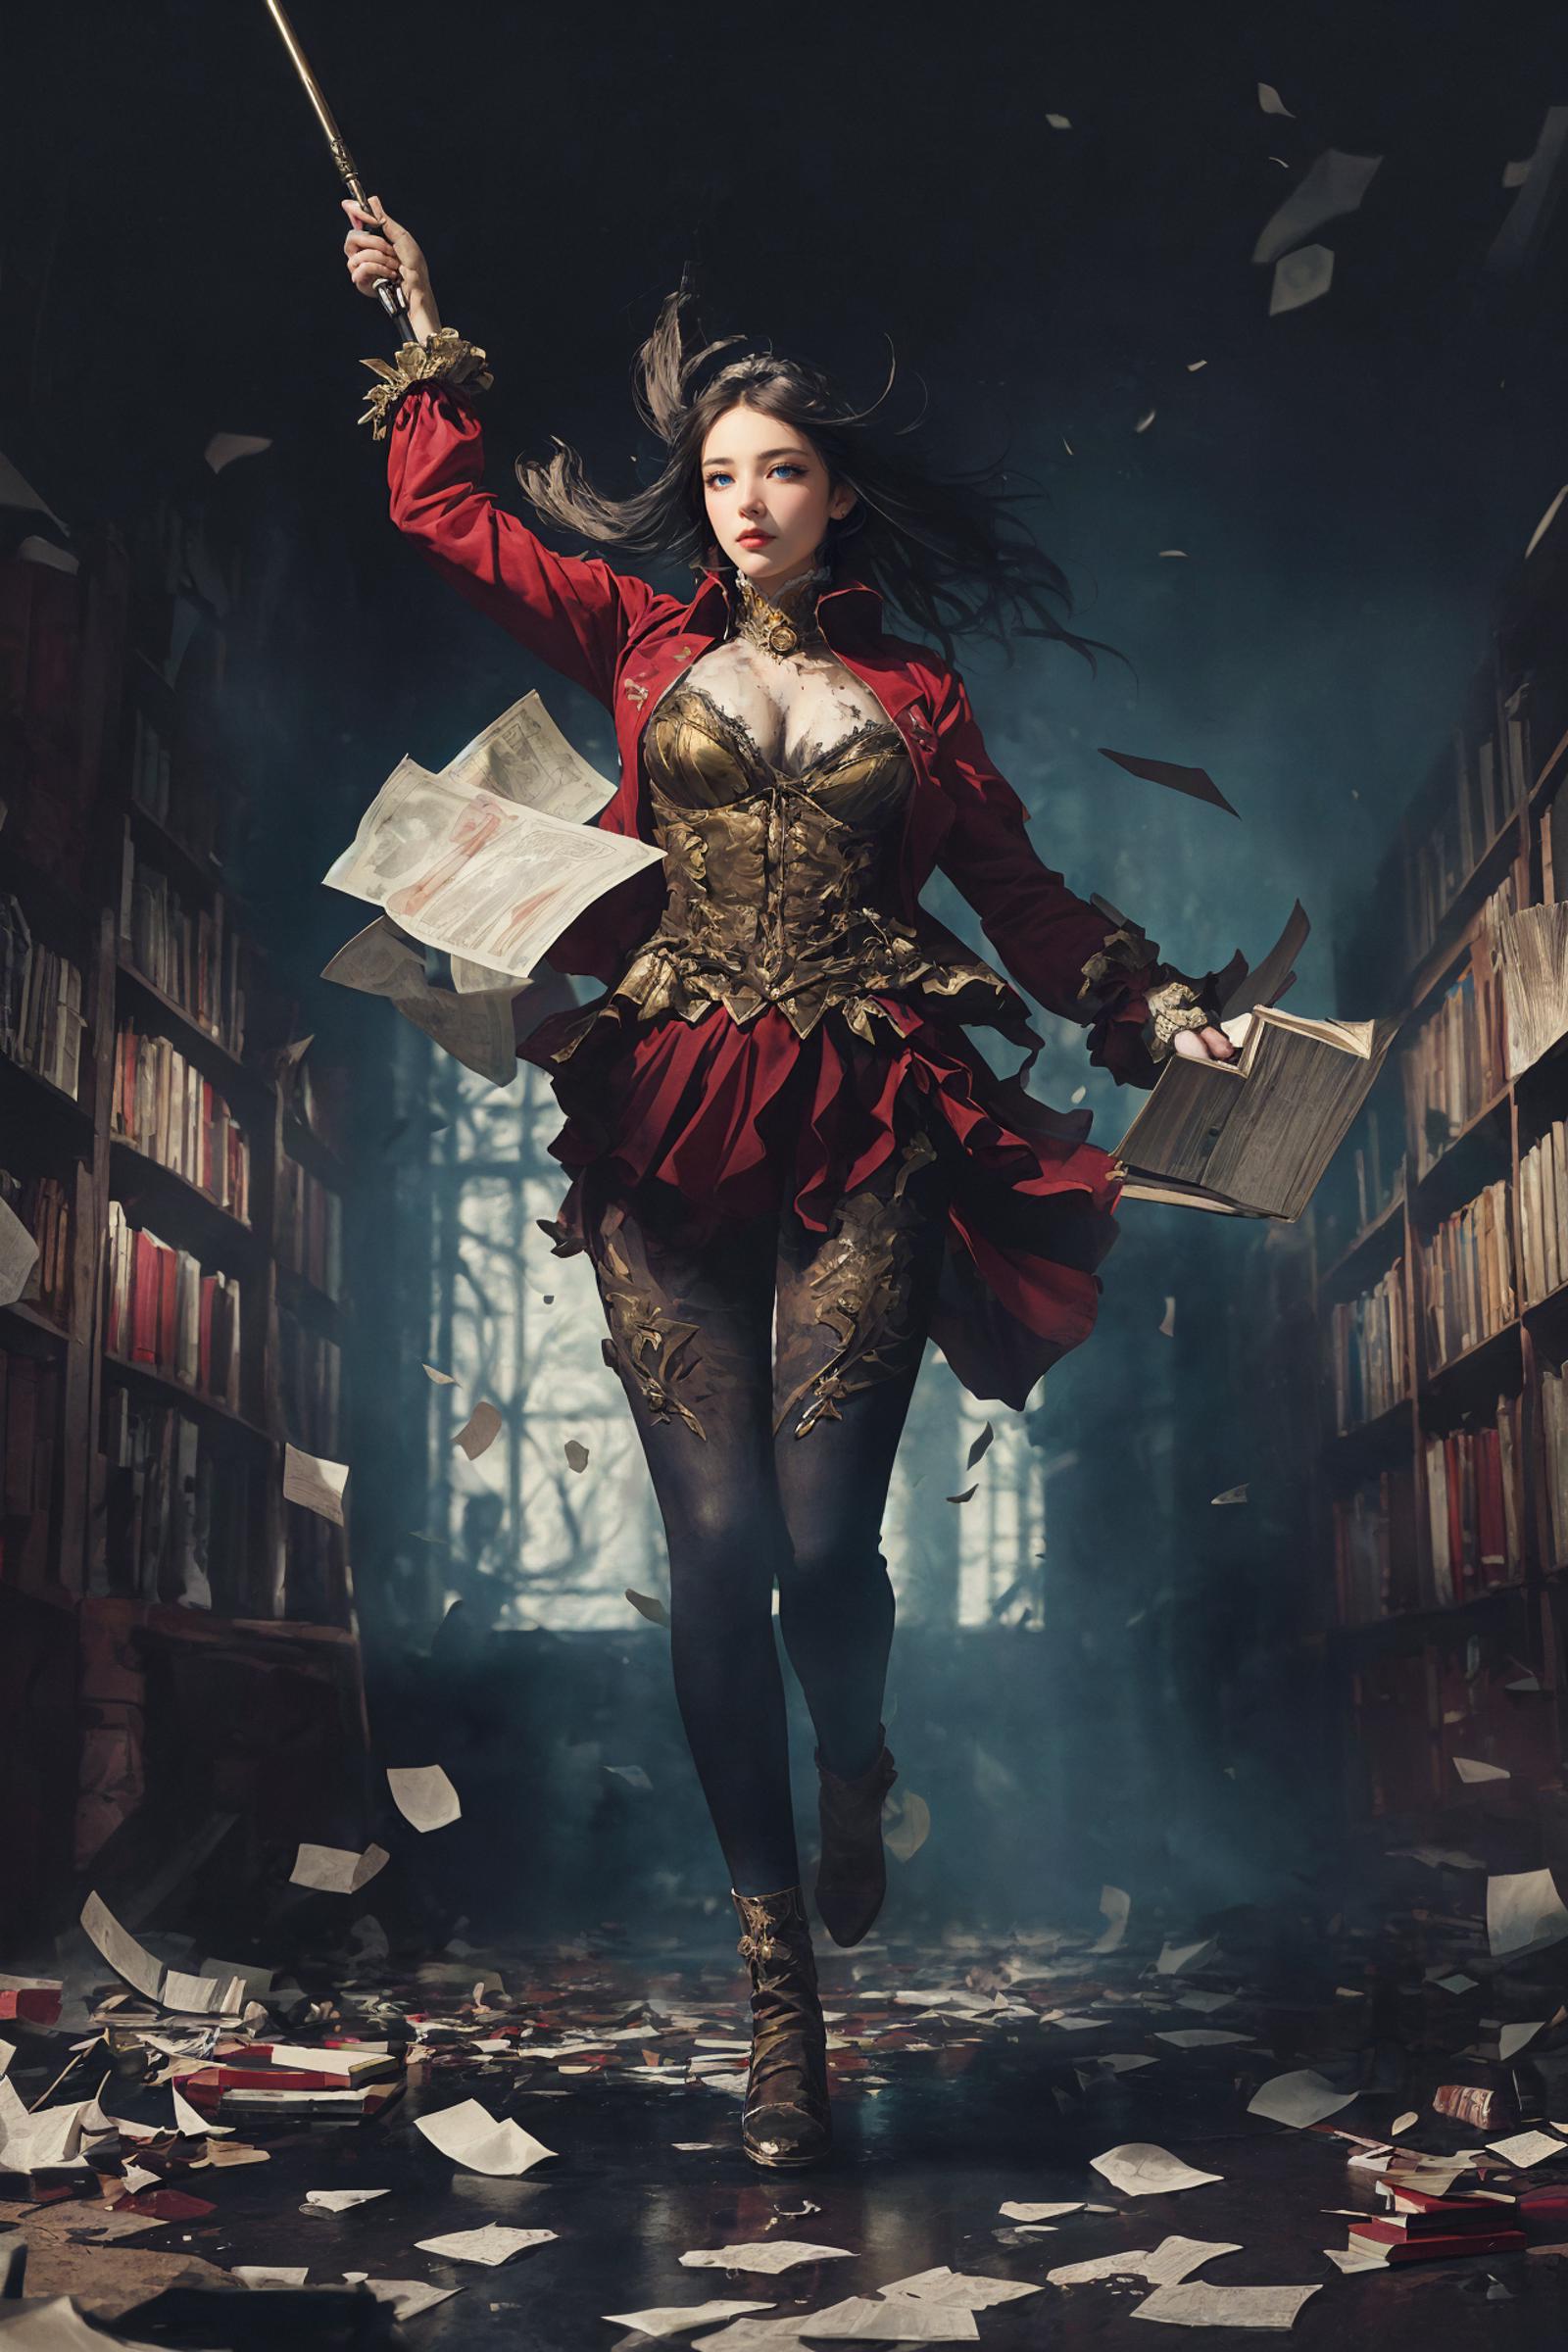 A woman in a red dress and corset reads a book while surrounded by books and papers.